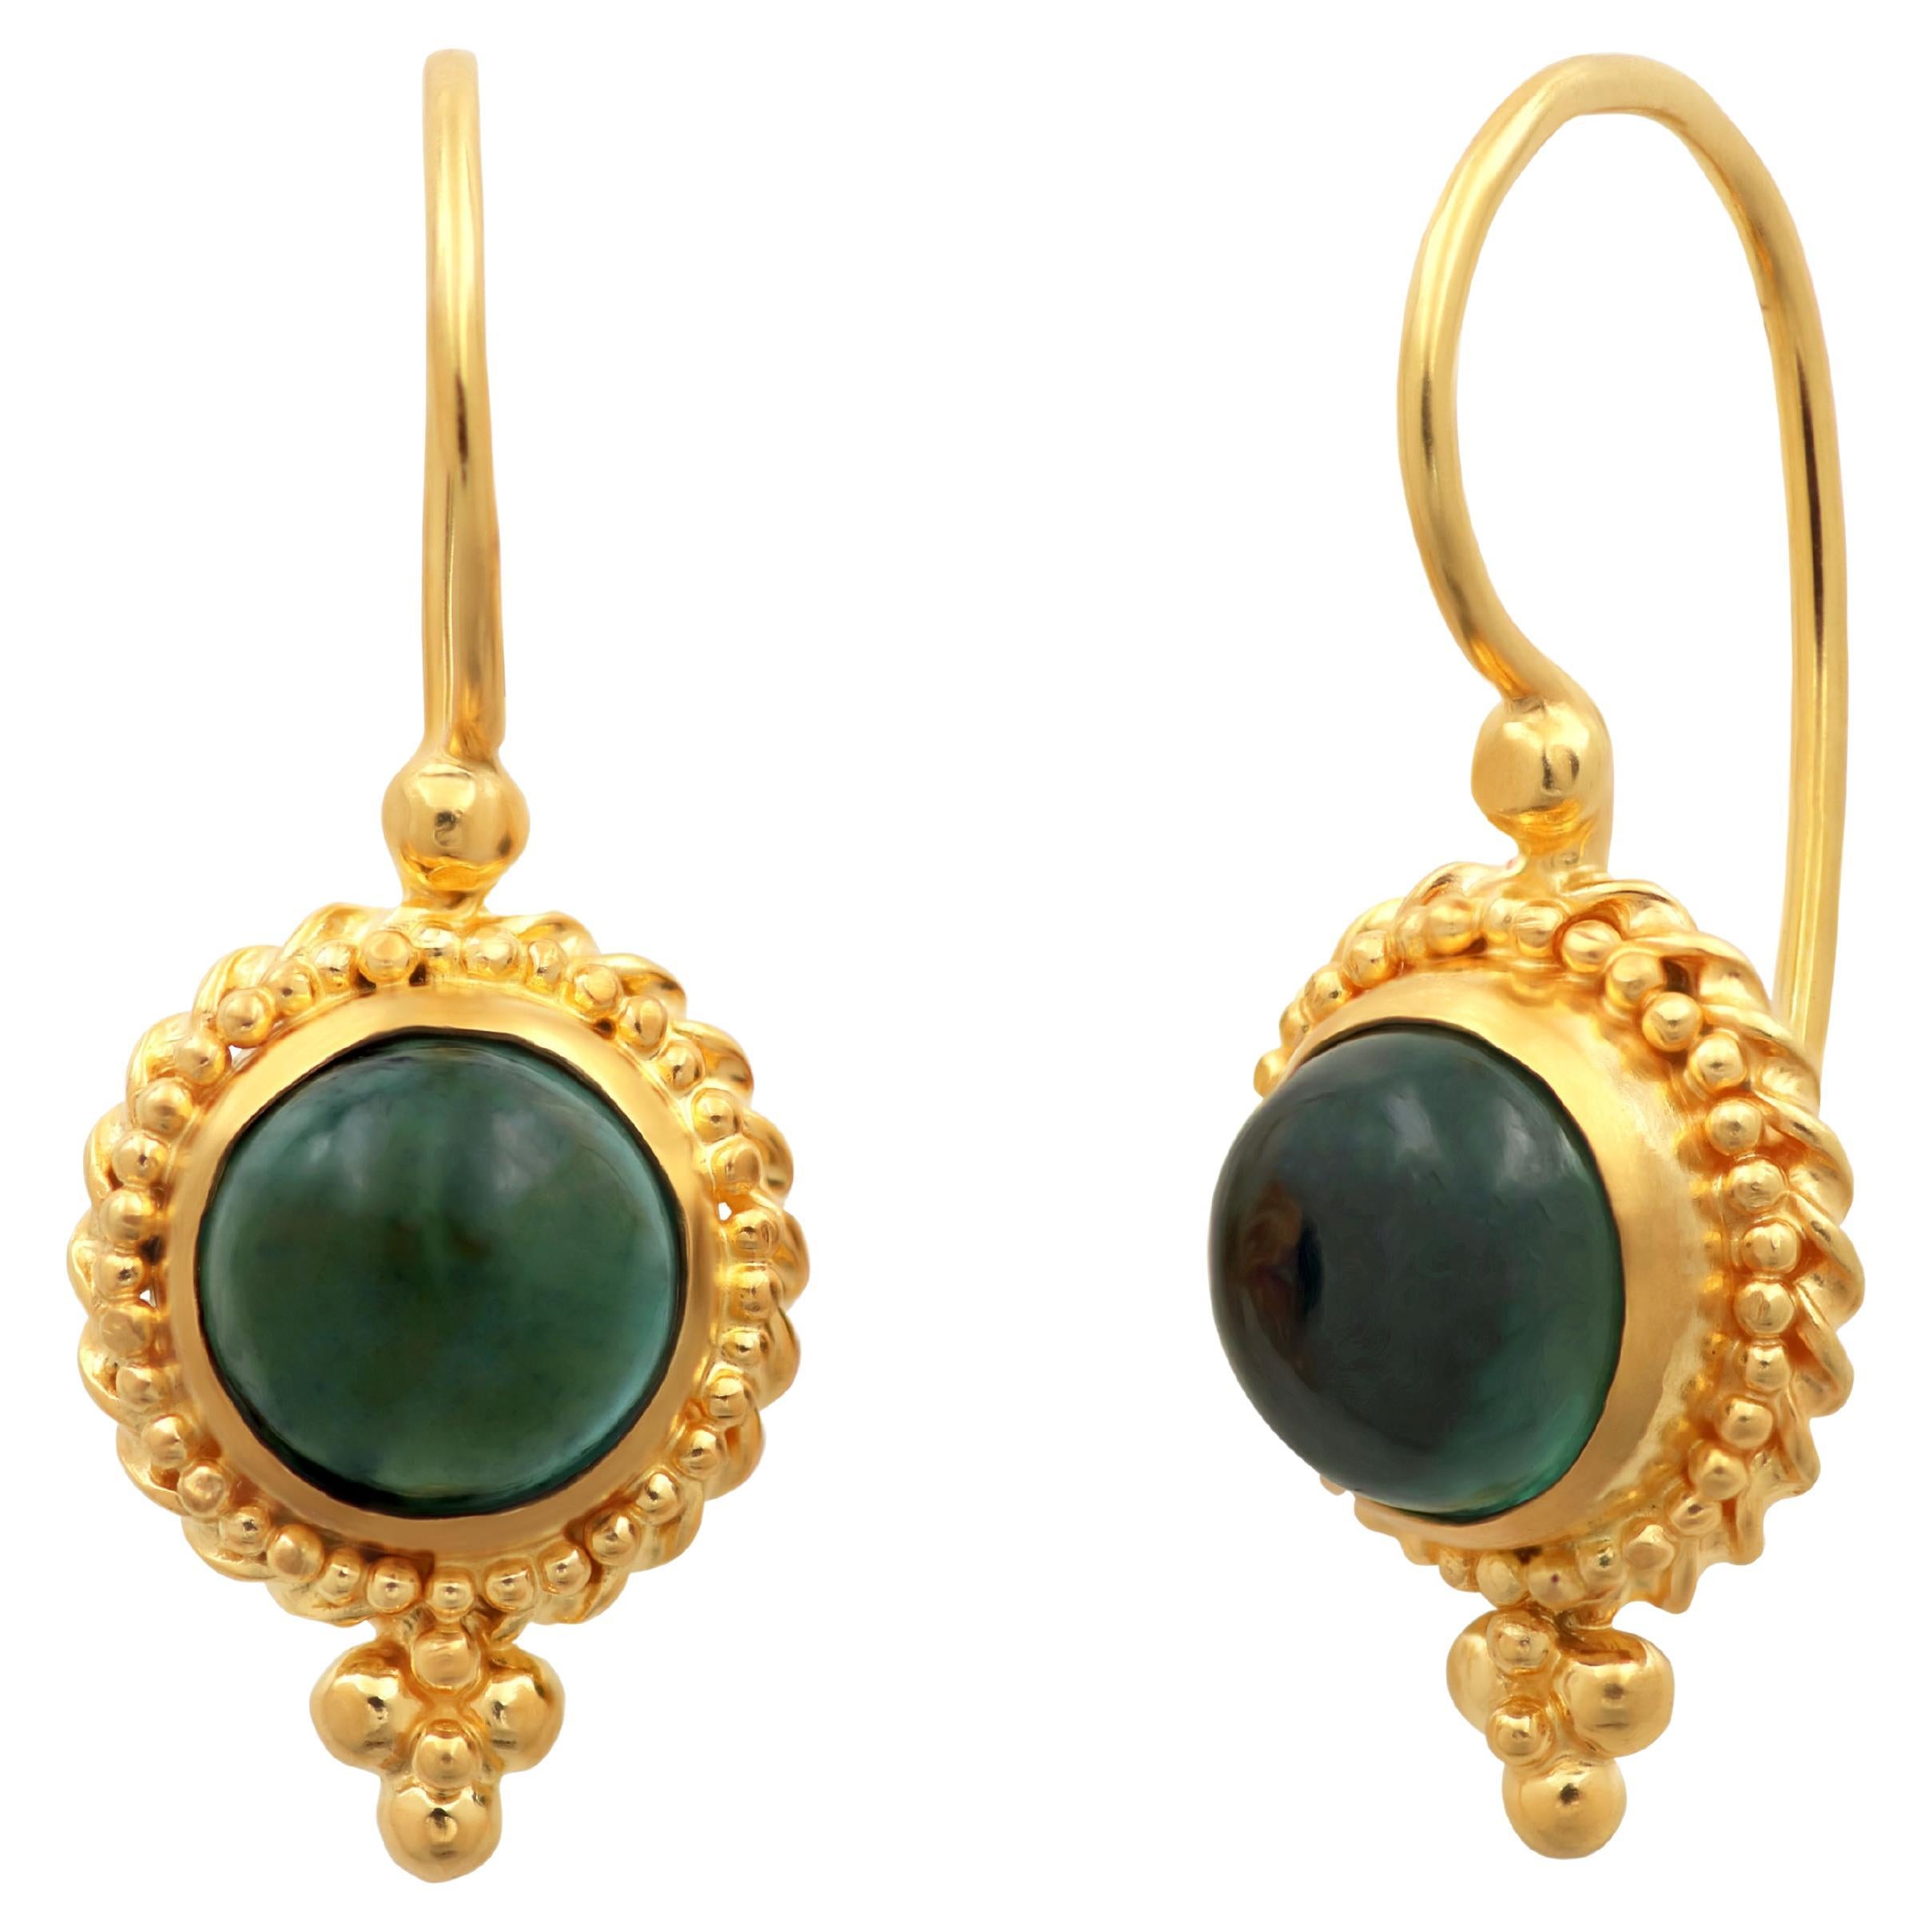 Dimos 18k Yellow Gold Earrings with Tourmaline